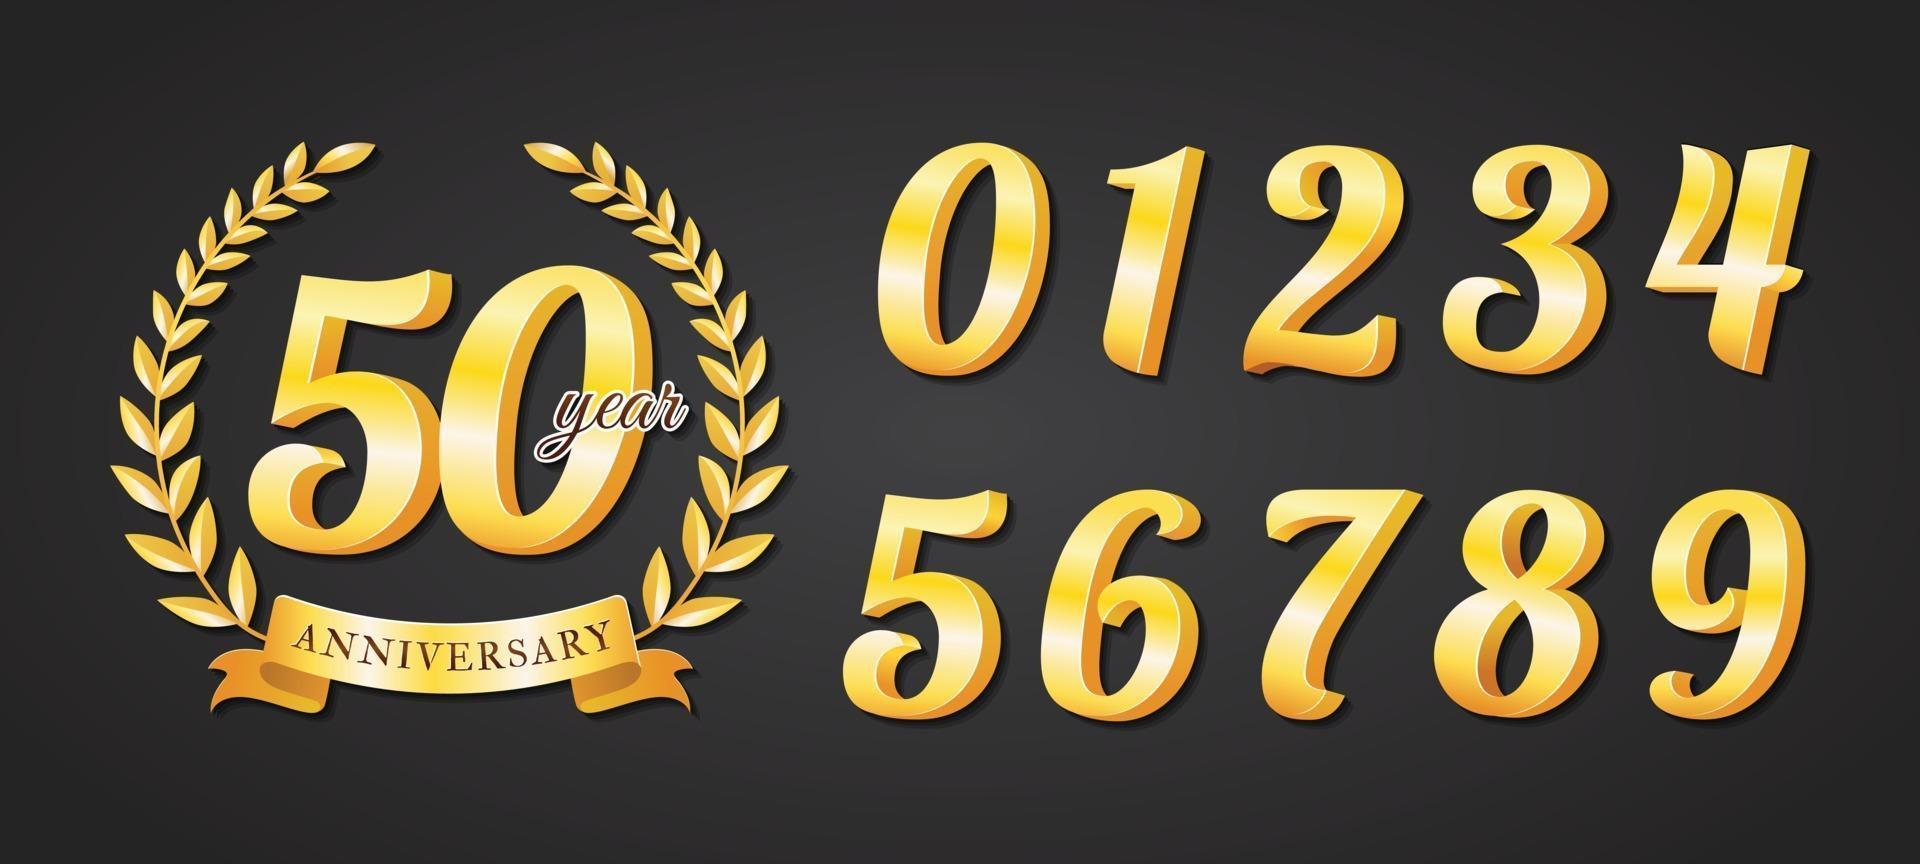 Set of Gold Metal Number for Anniversary Badge vector